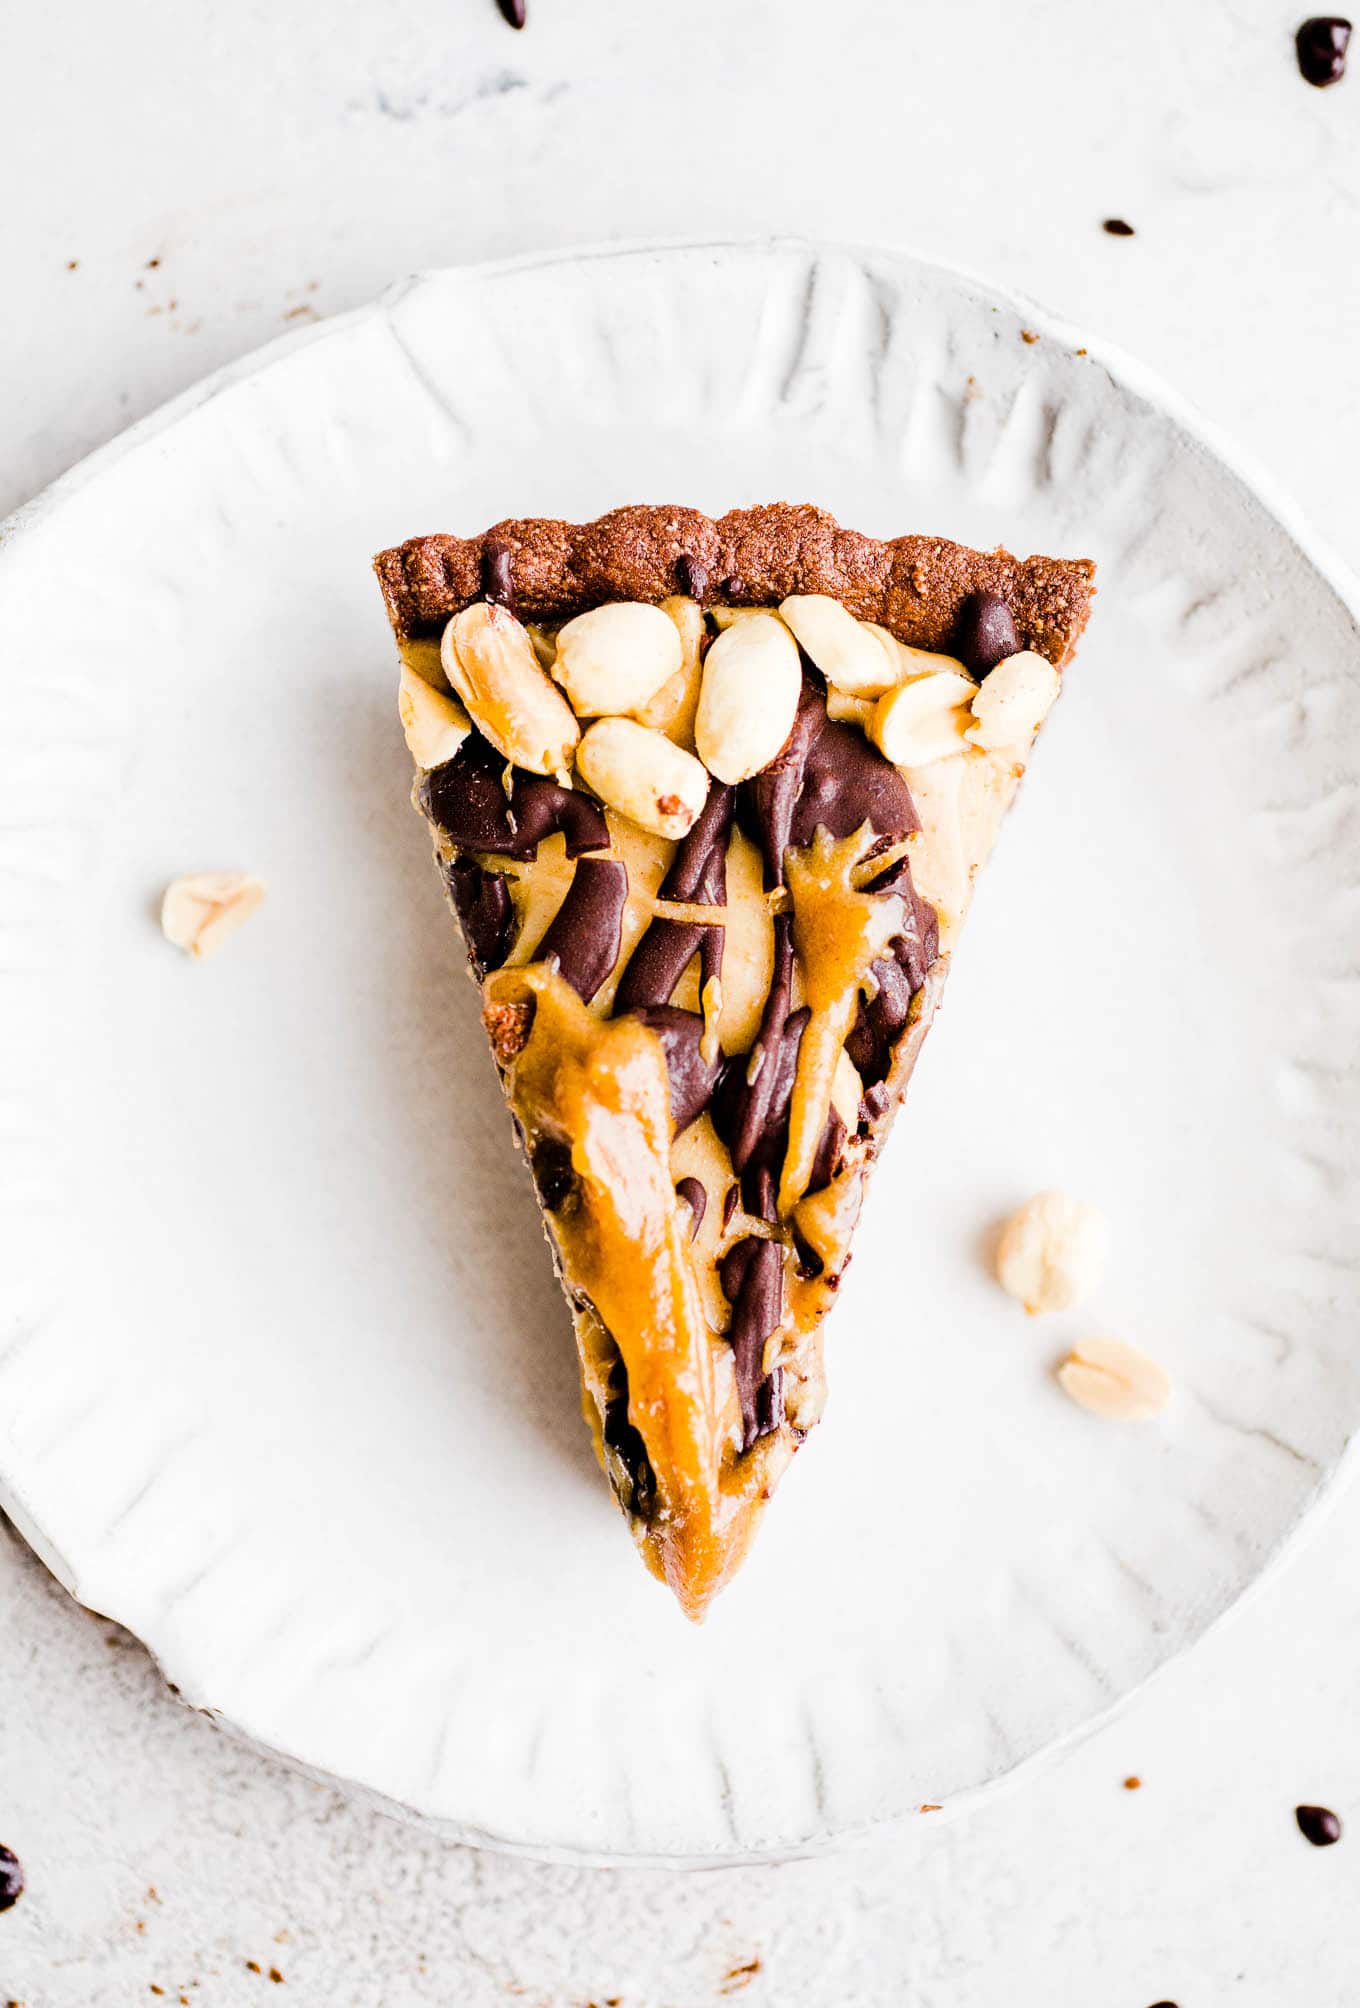 slice of pie with peanuts, chocolate, and caramel